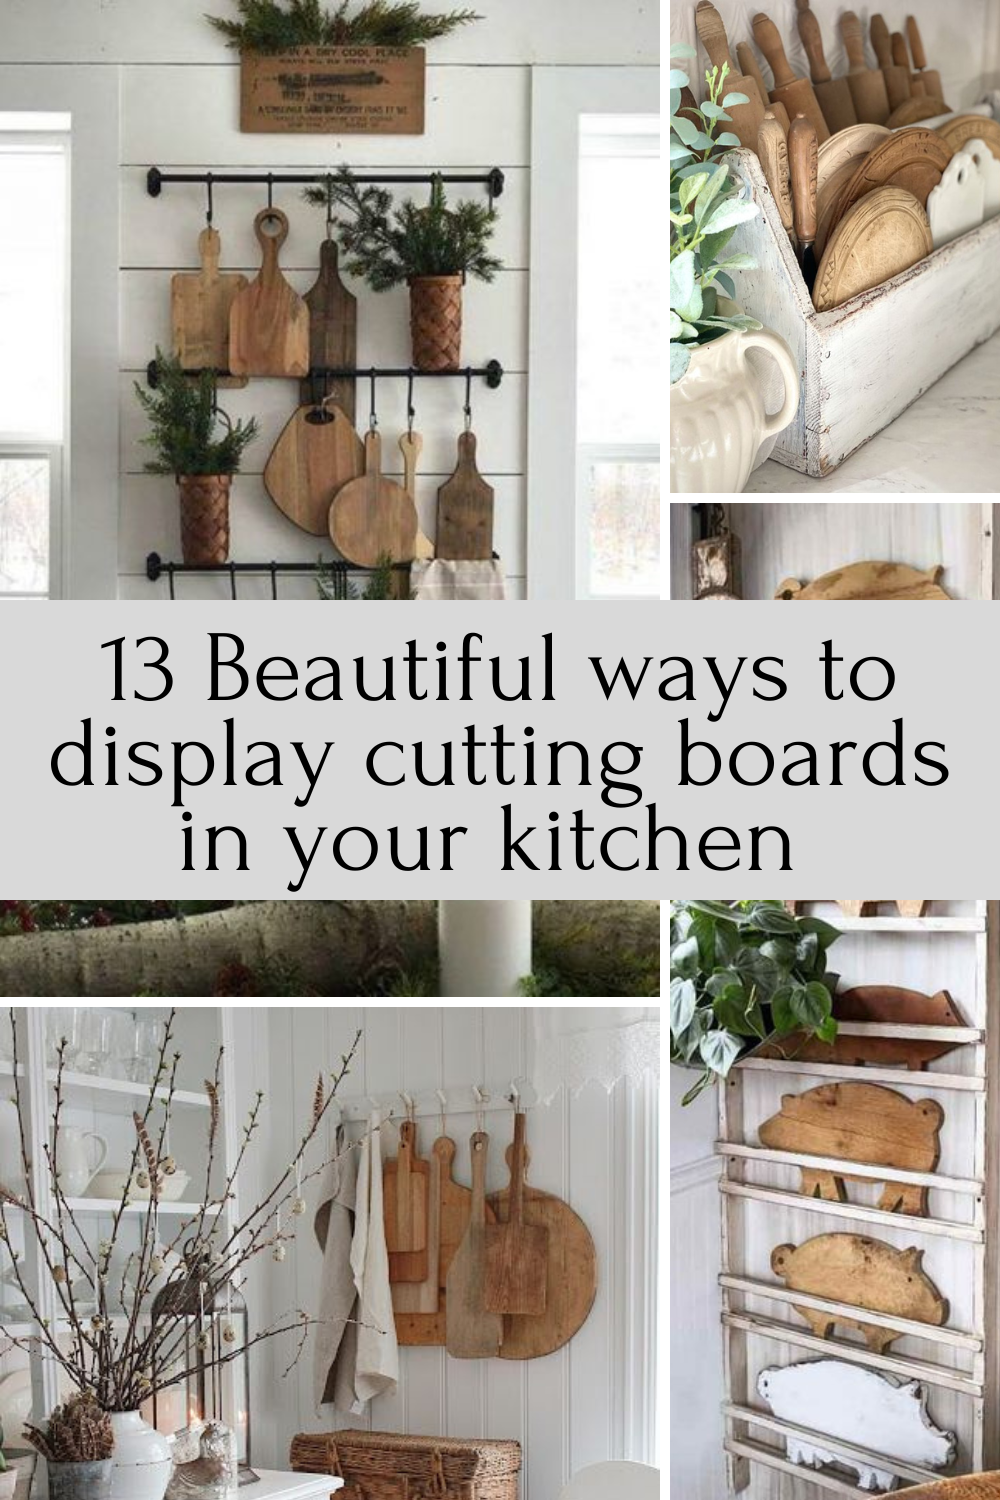 https://mylifeonkayderosscreek.com/wp-content/uploads/2023/01/13-Beautiful-ways-to-display-cutting-boards-in-your-kitchen.png